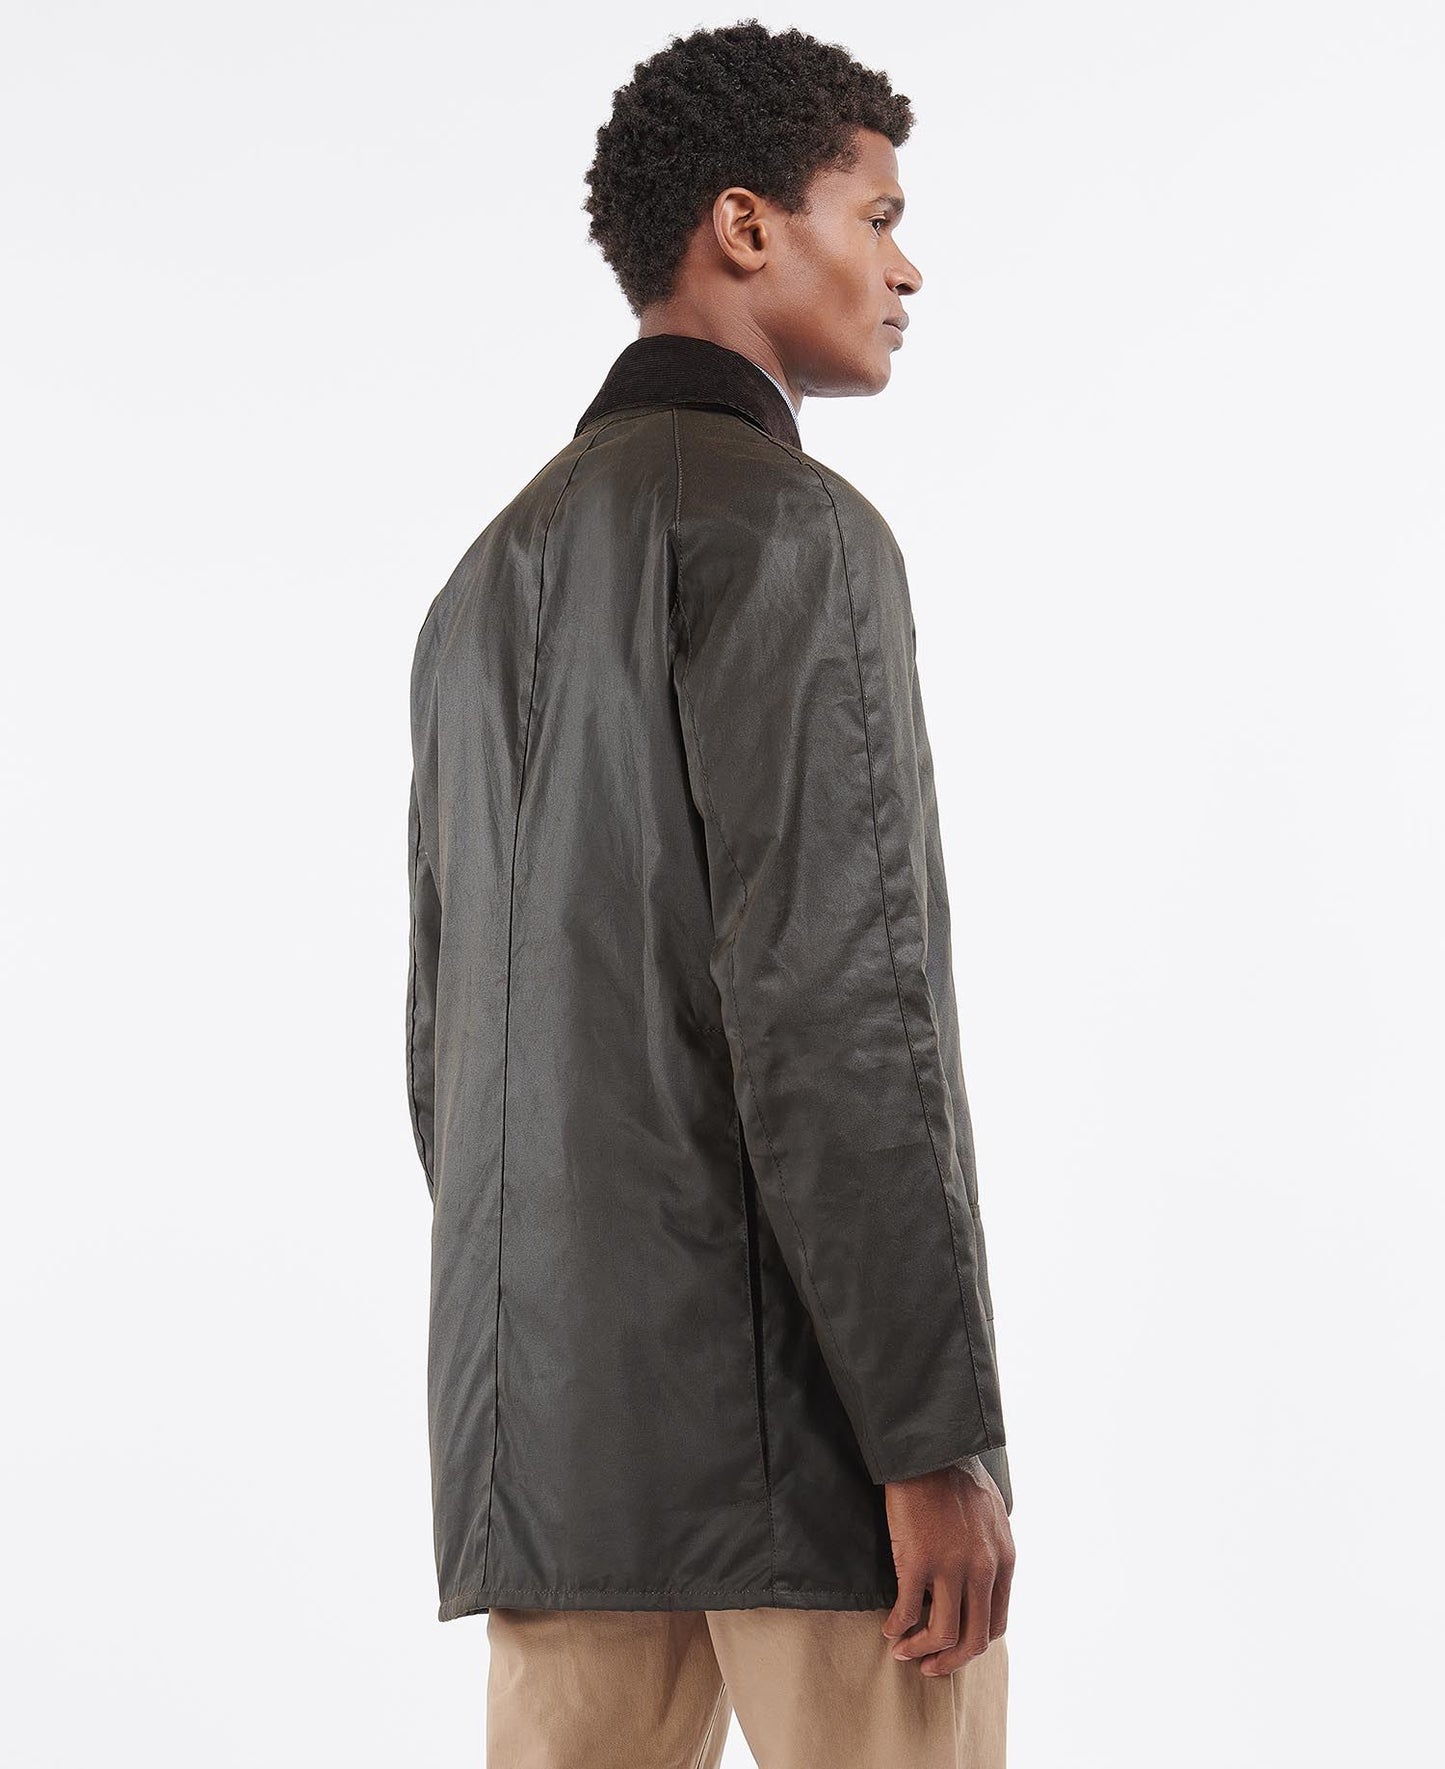 Barbour Beausby Wax Jacket